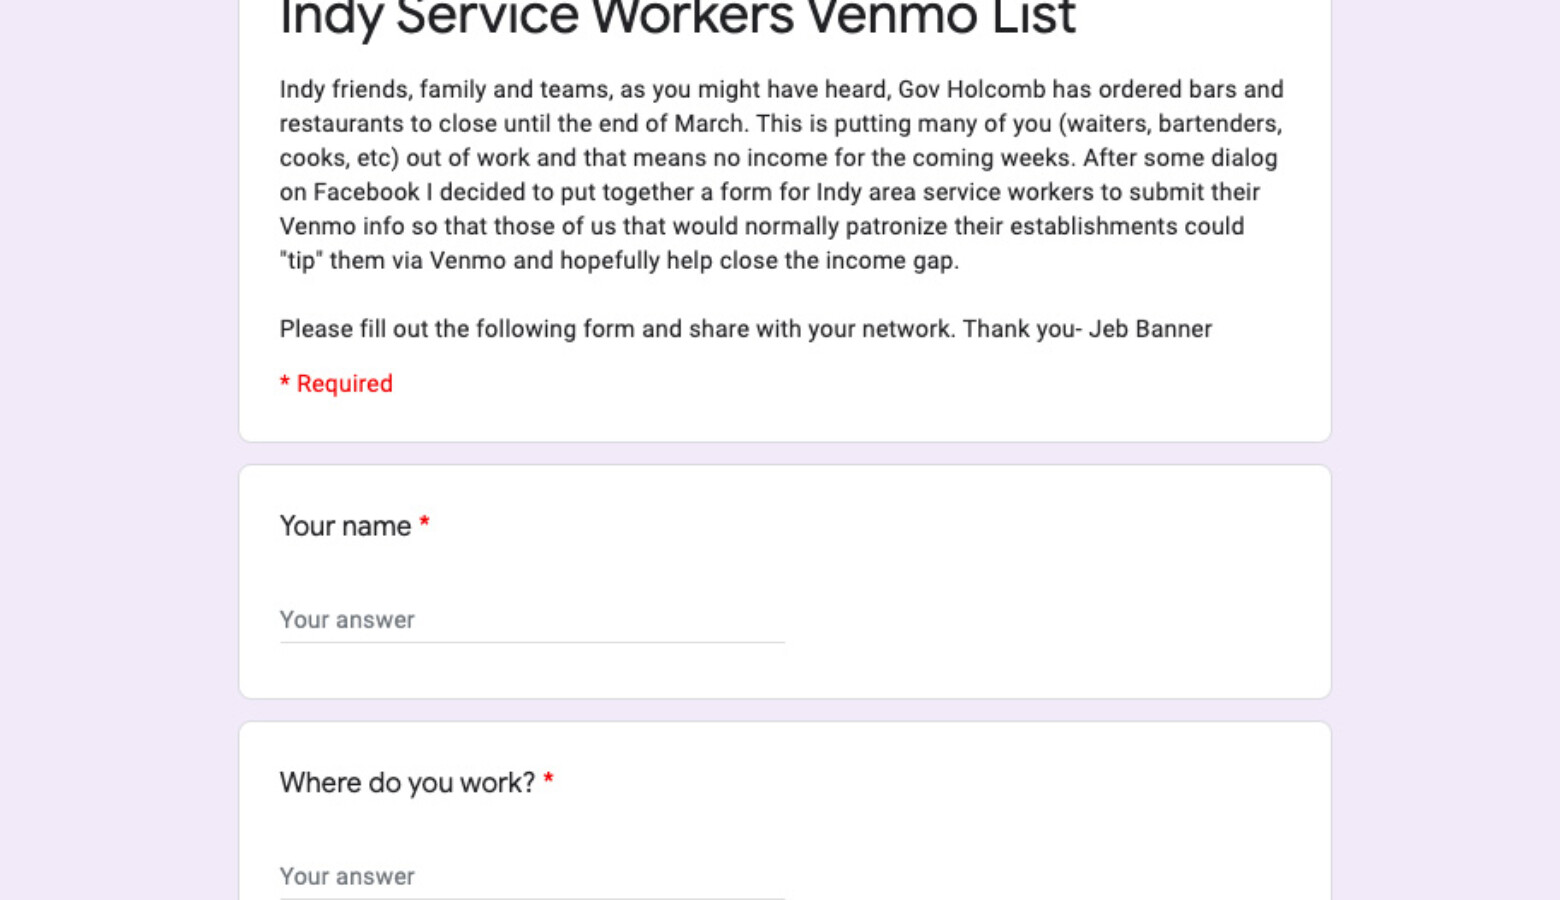 The Google Form is designed to help financially support service workers in the Indianapolis region. (Screenshot Indy Service Workers Venmo List Google Form)